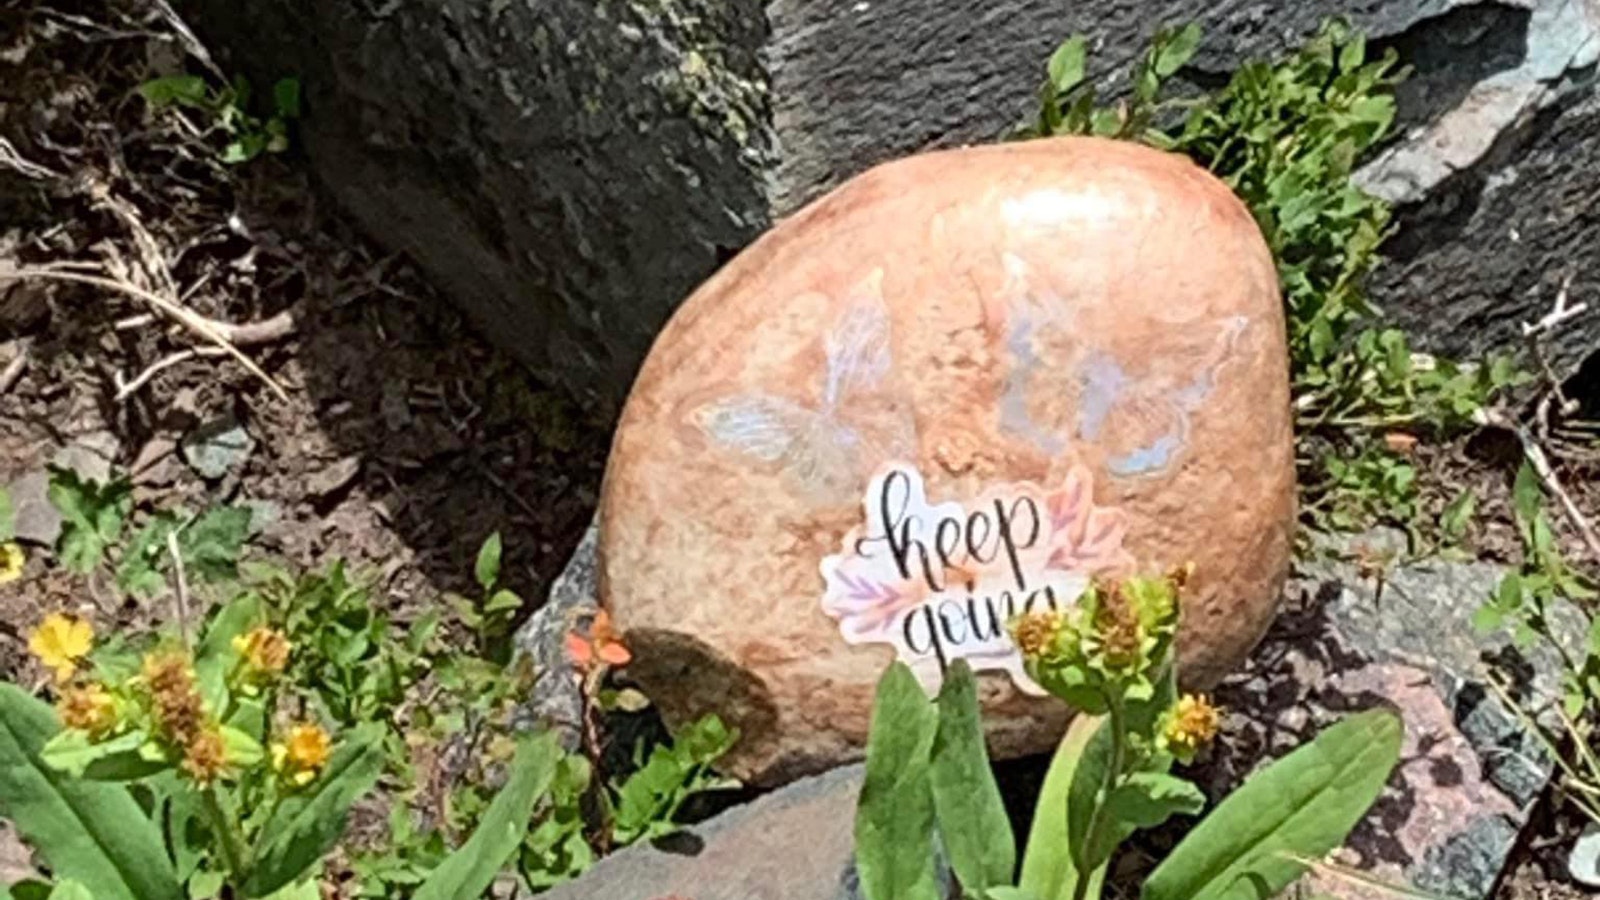 Before starting the "positivi-turtles" movement, Jenn Ellis painted hopeful messages on rocks and left them places for people to find.